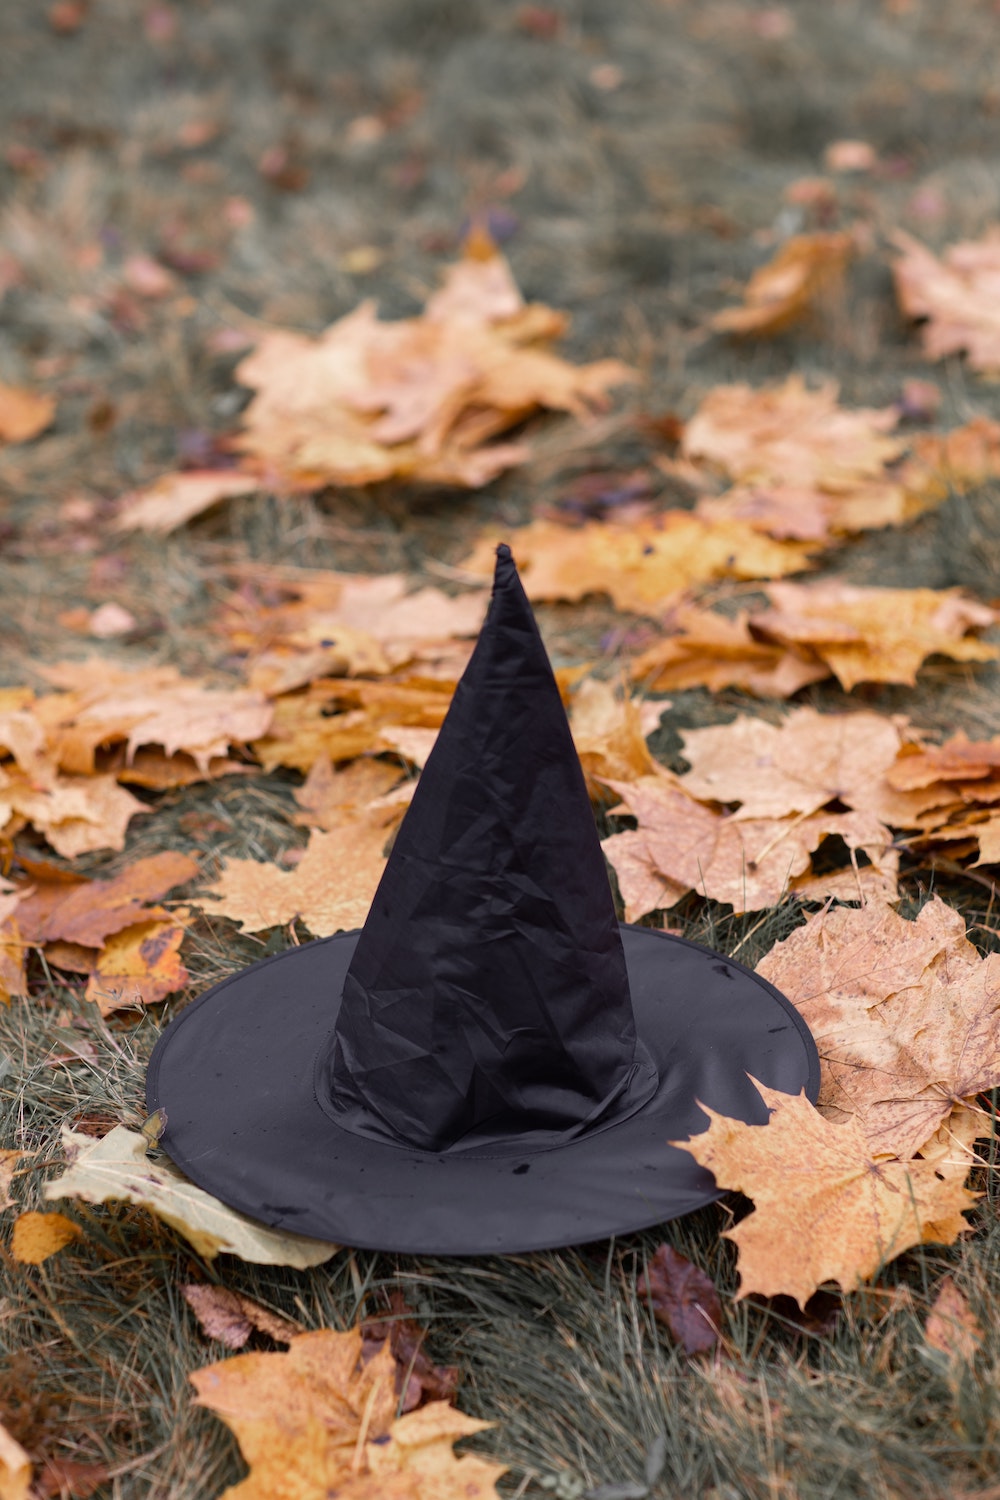 A black witch hat and some dried leaves